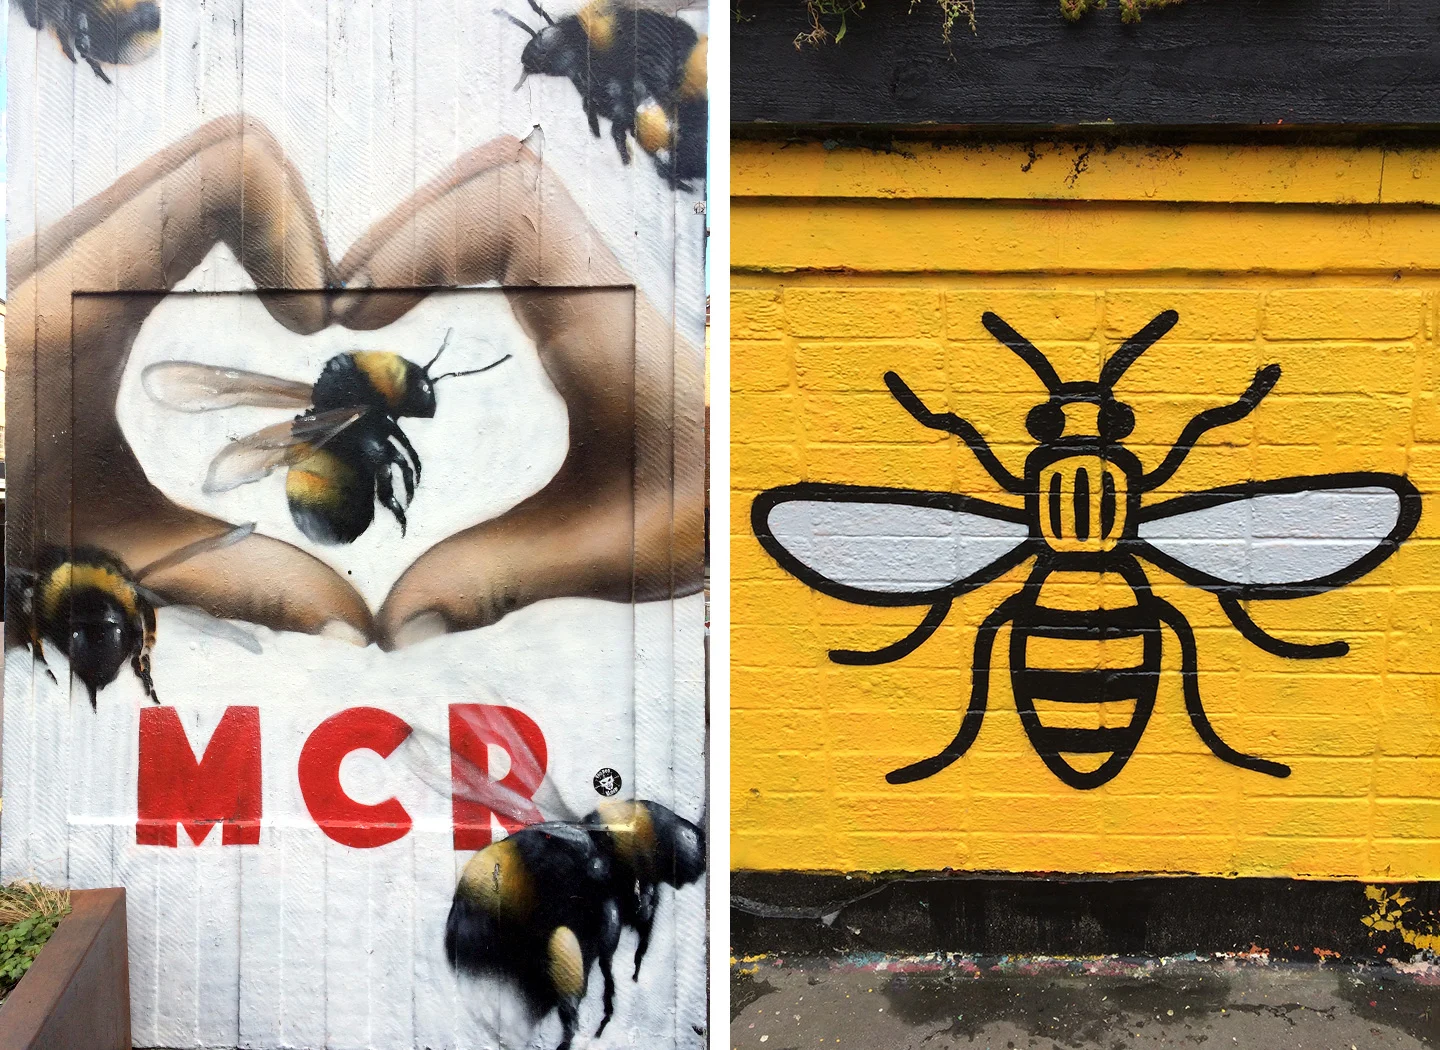 Manchester bees street art in the Northern Quarter